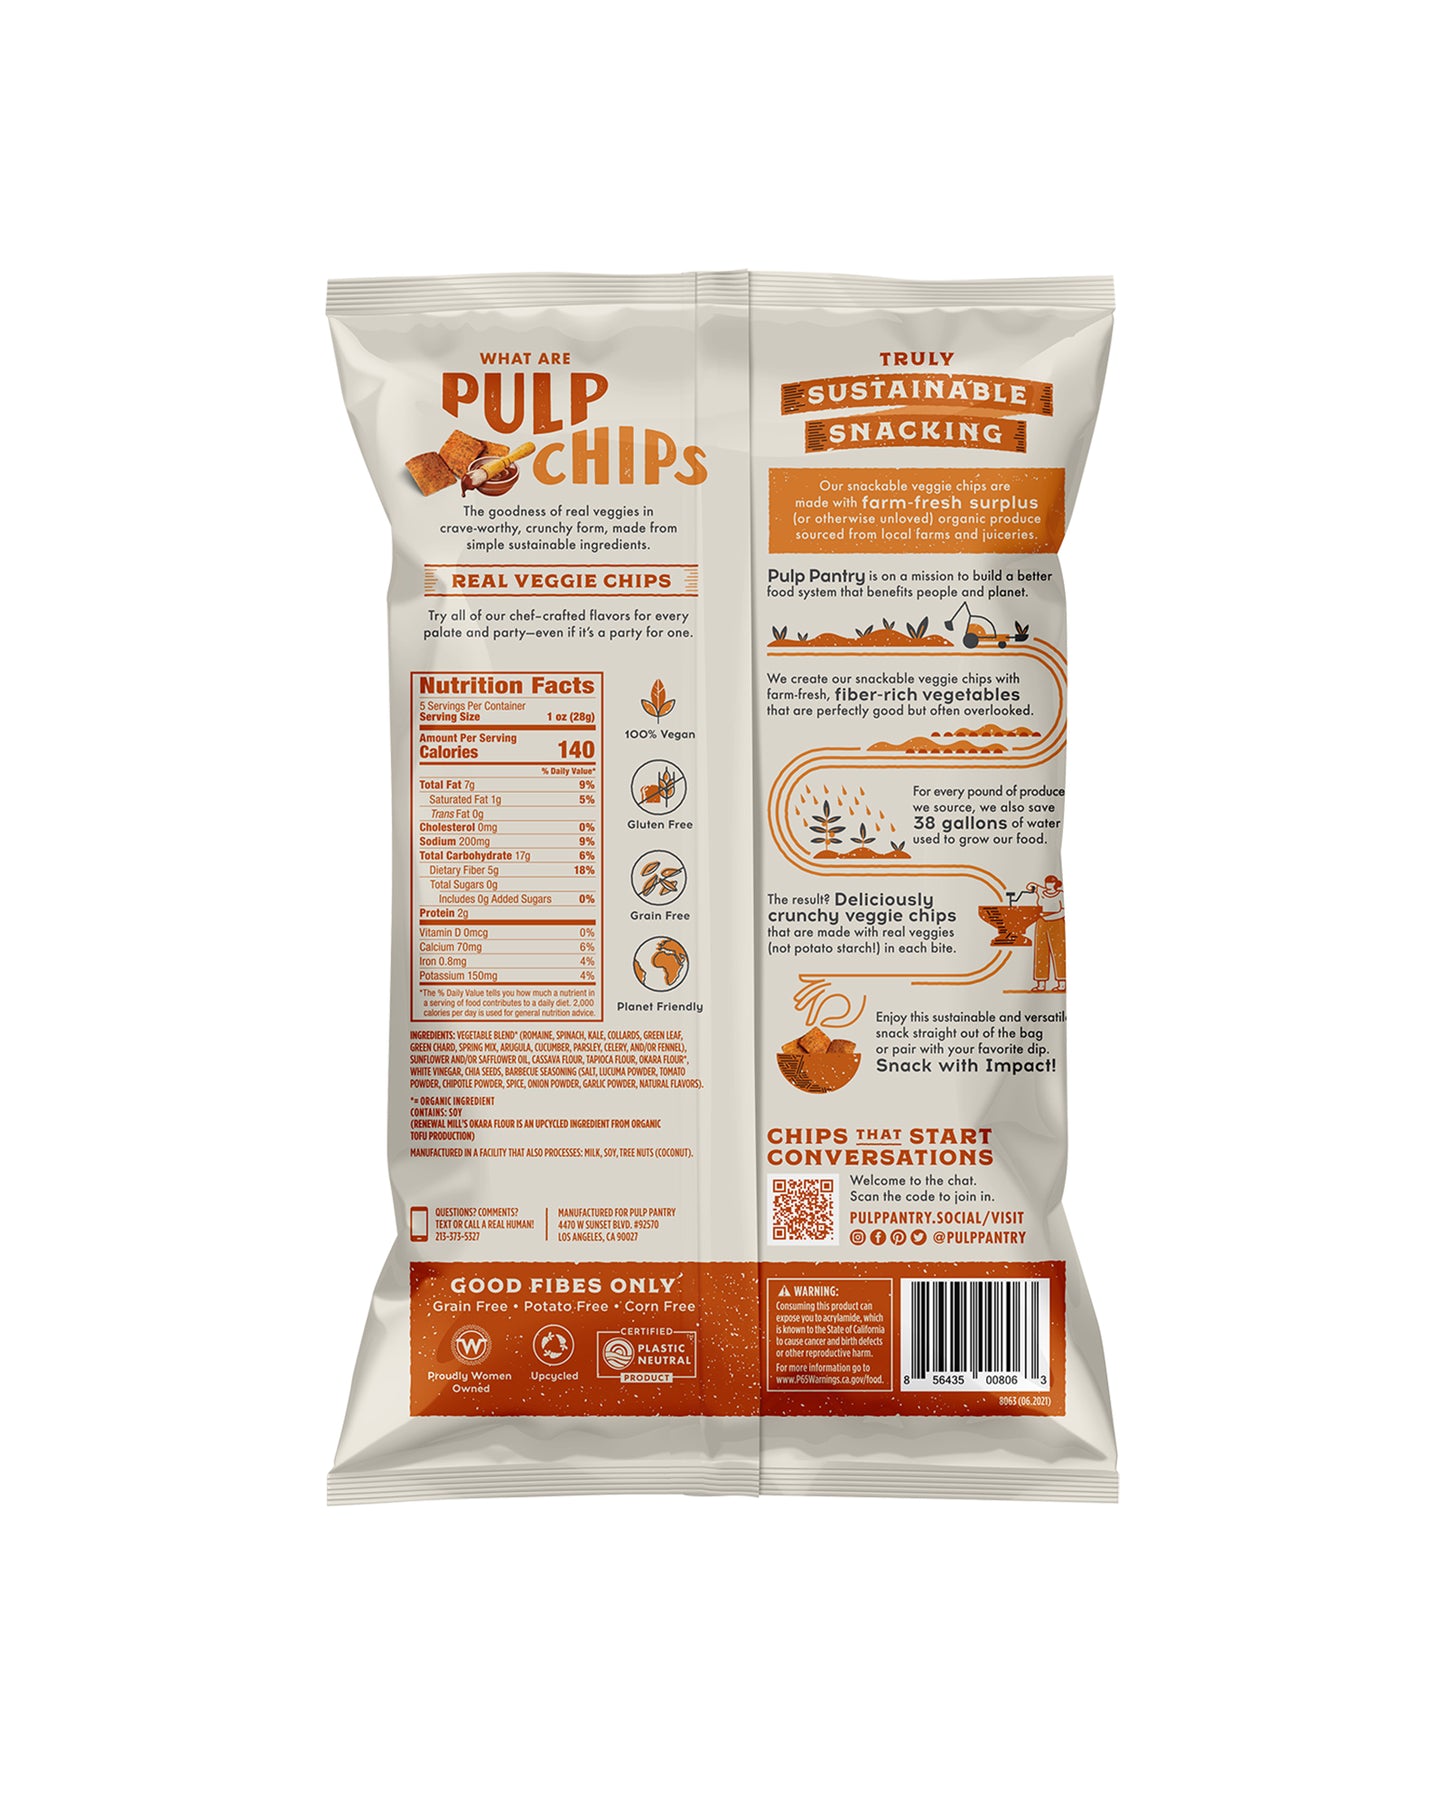 Barbecue Veggie Pulp Chips